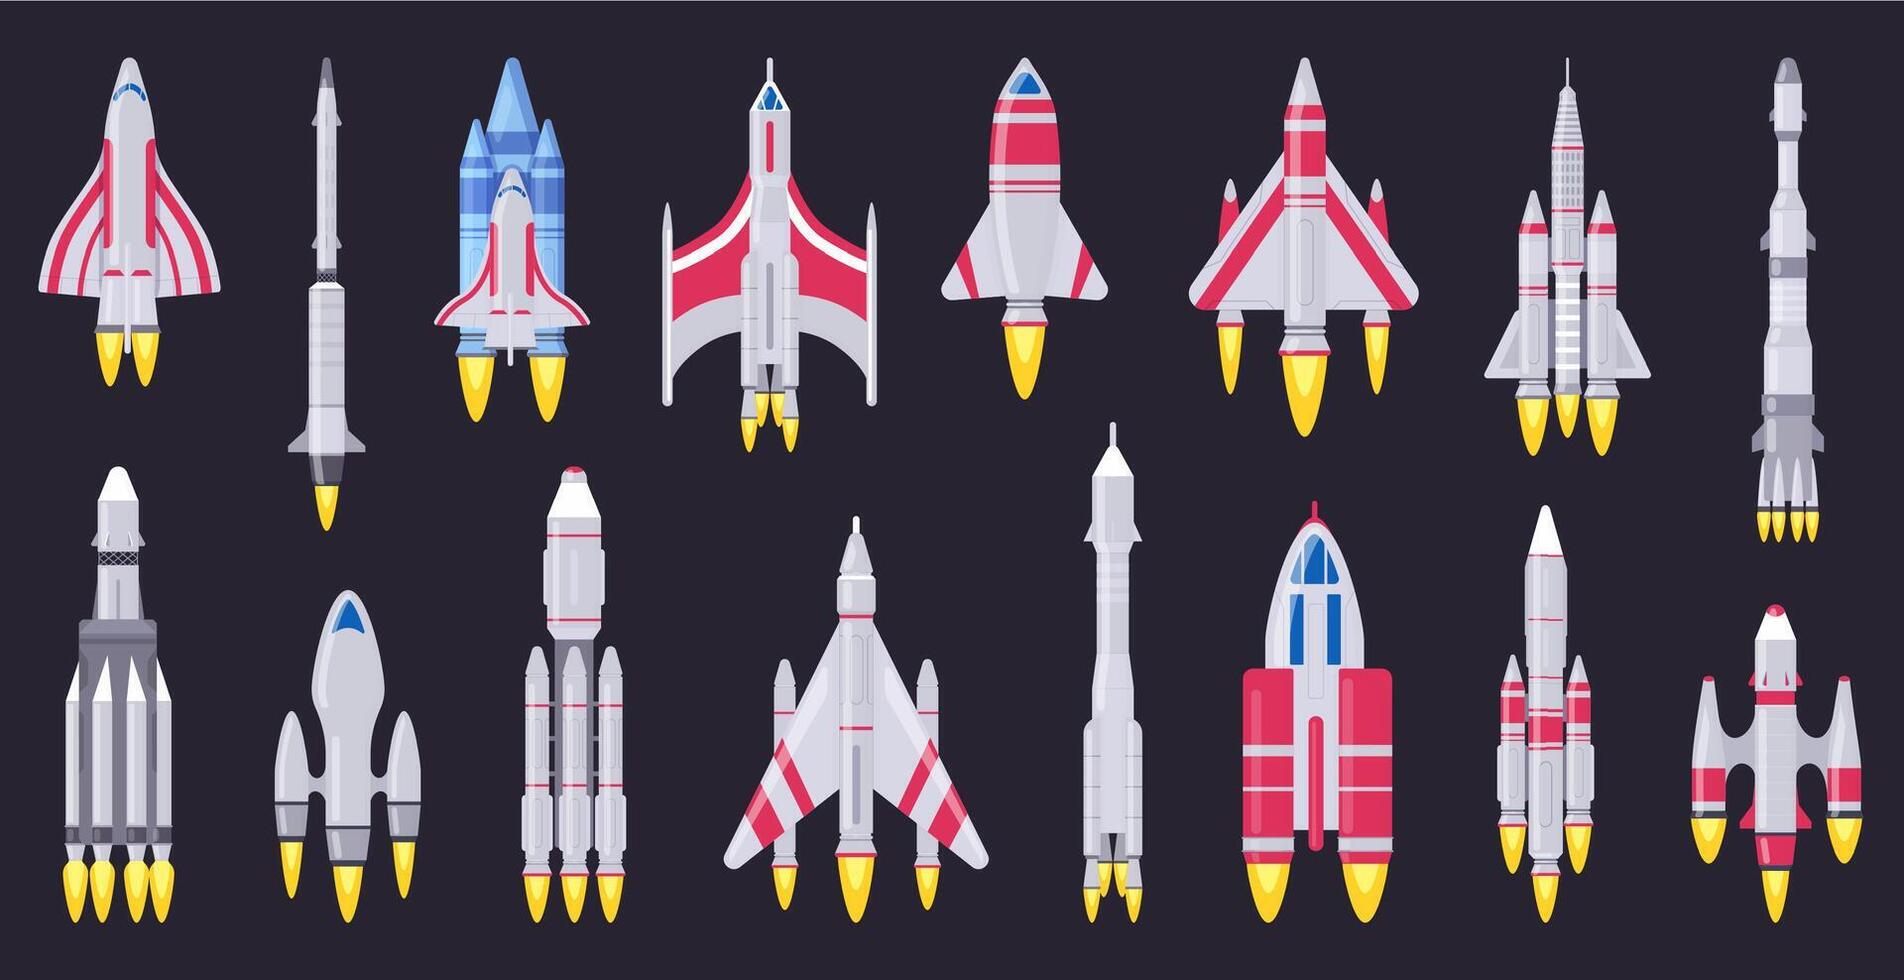 Spaceships vehicles. Space rocket, flying aerospace shuttle, spacecraft ships and ufo ships. Space rocket vehicles vector illustration set